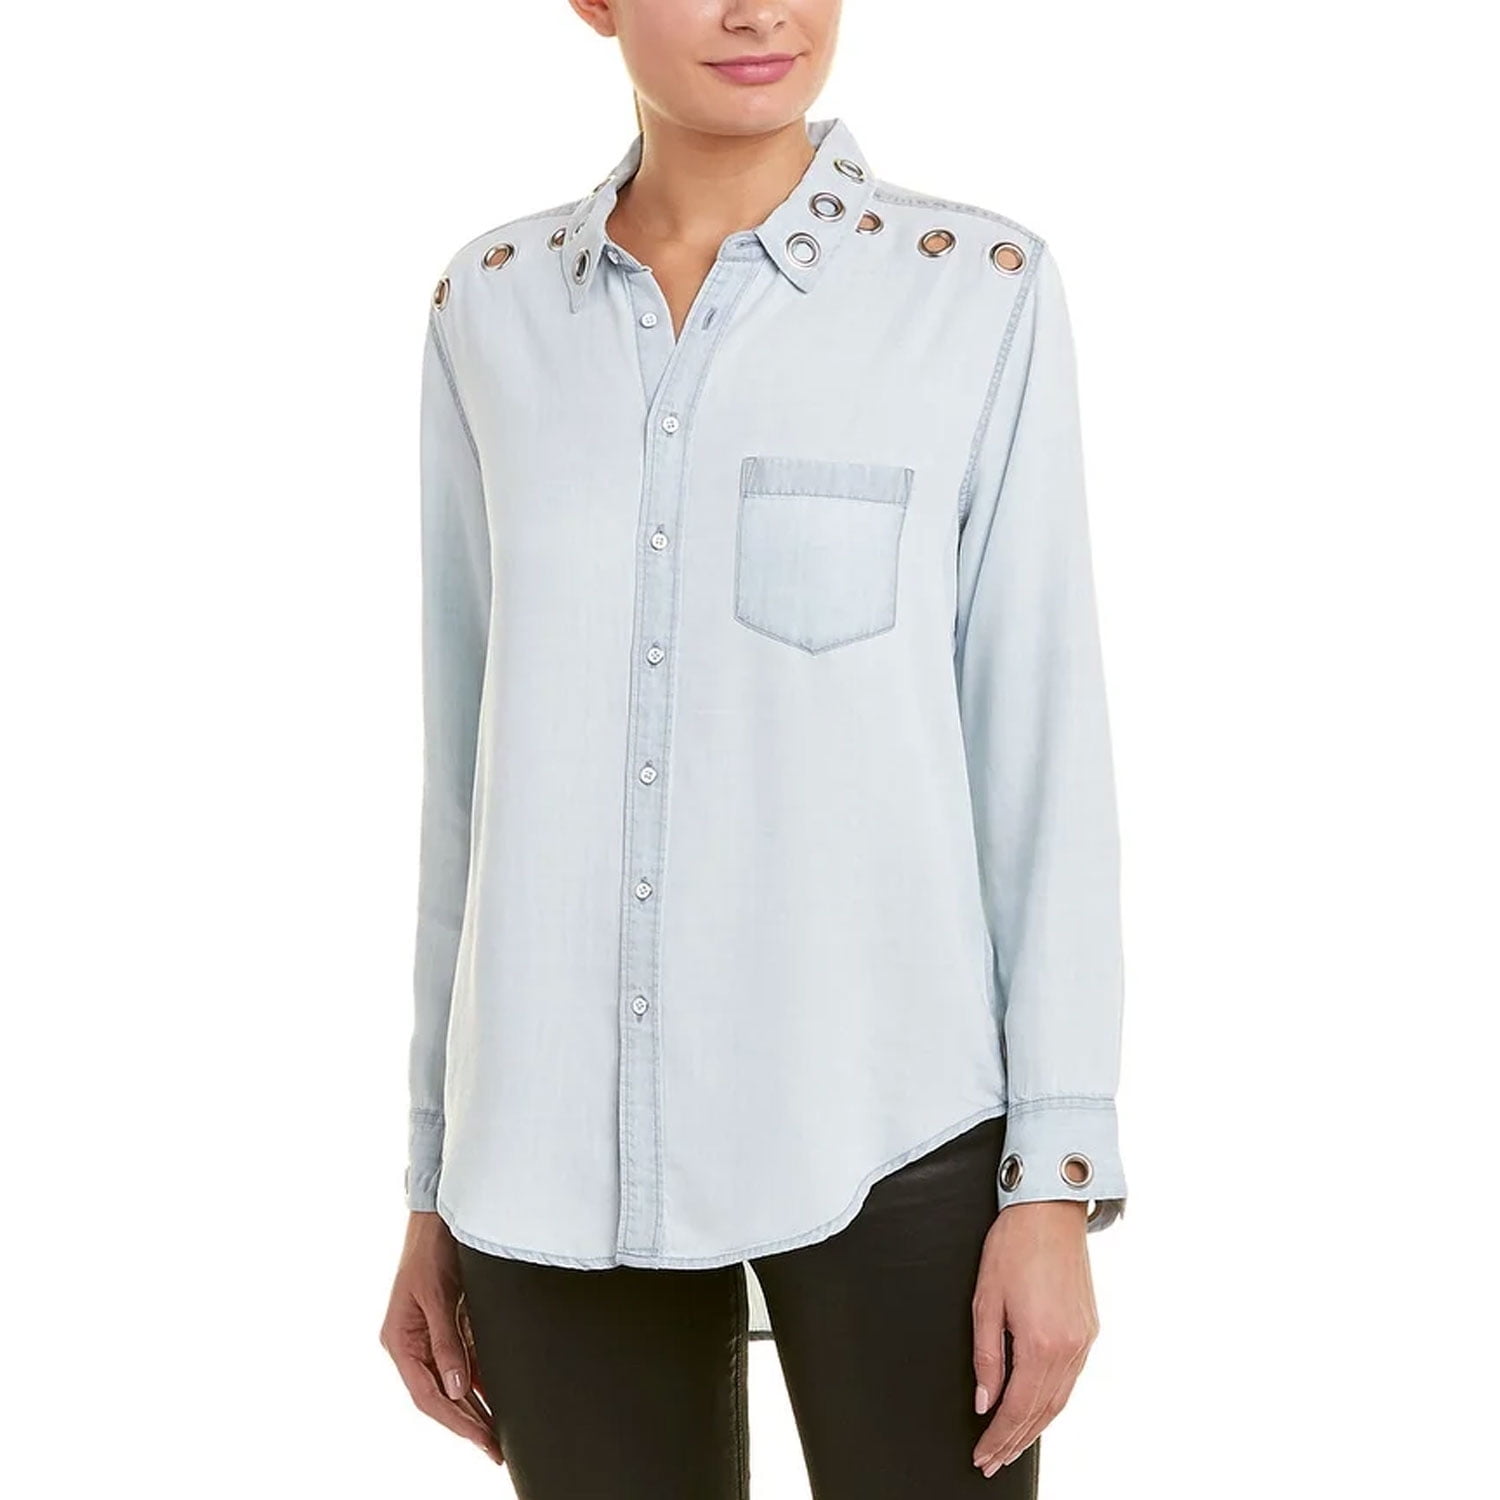 DL1961 Womens Woven Casual Blouse 